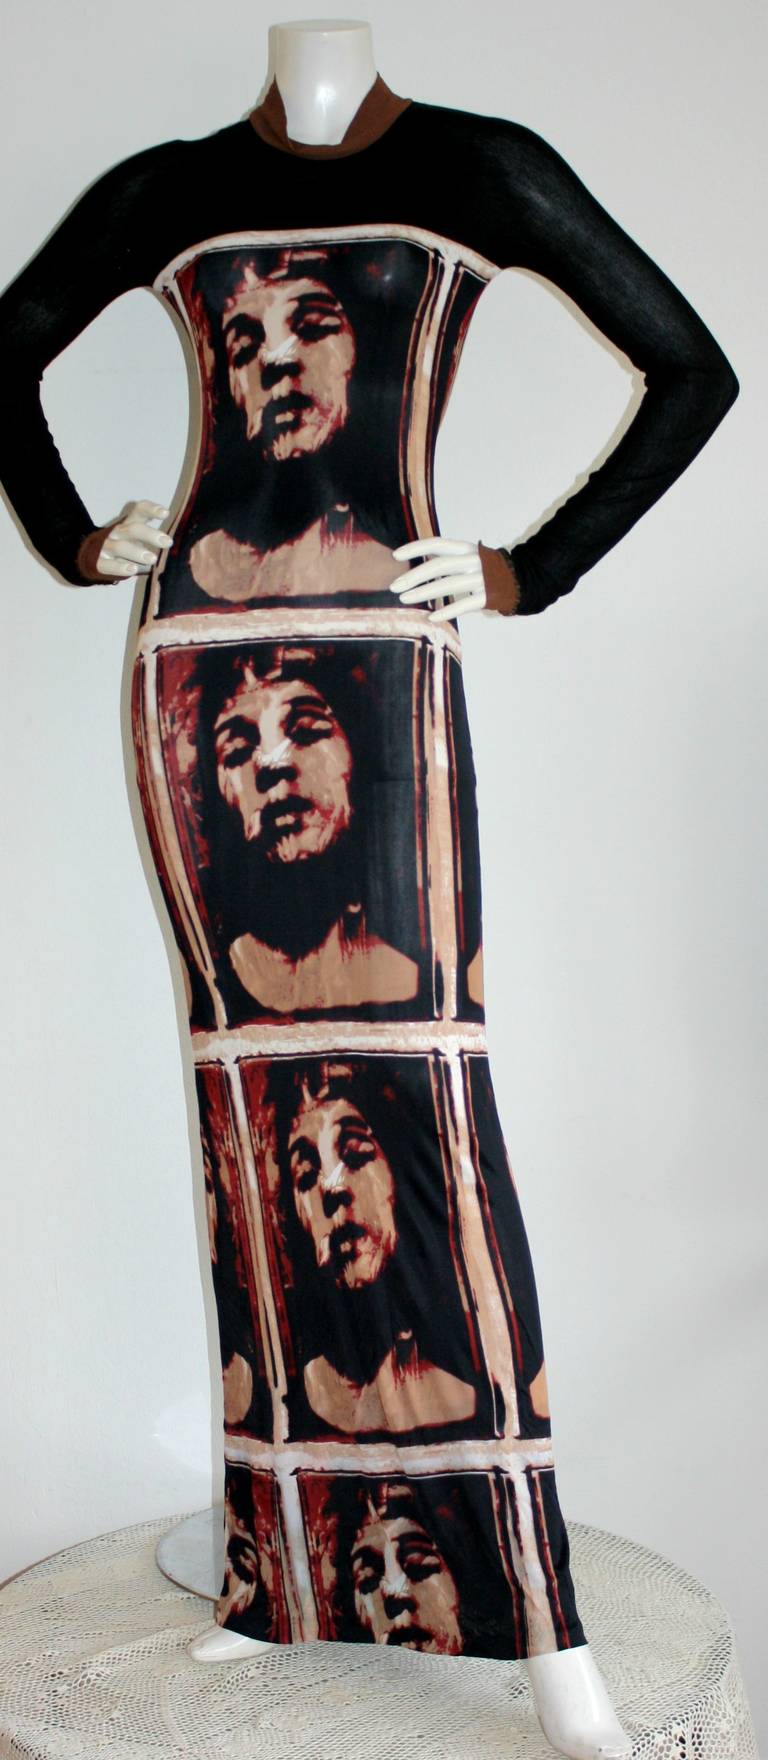 Amazing vintage Gaultier dress. Features face print on front, sides, and back. Long sleeves, with chic cut-out at cuff. Incredible fit, with amazing detail. In great condition. Approximately Size Small.

Measurements: (Lots of stretch)
34-40 inch